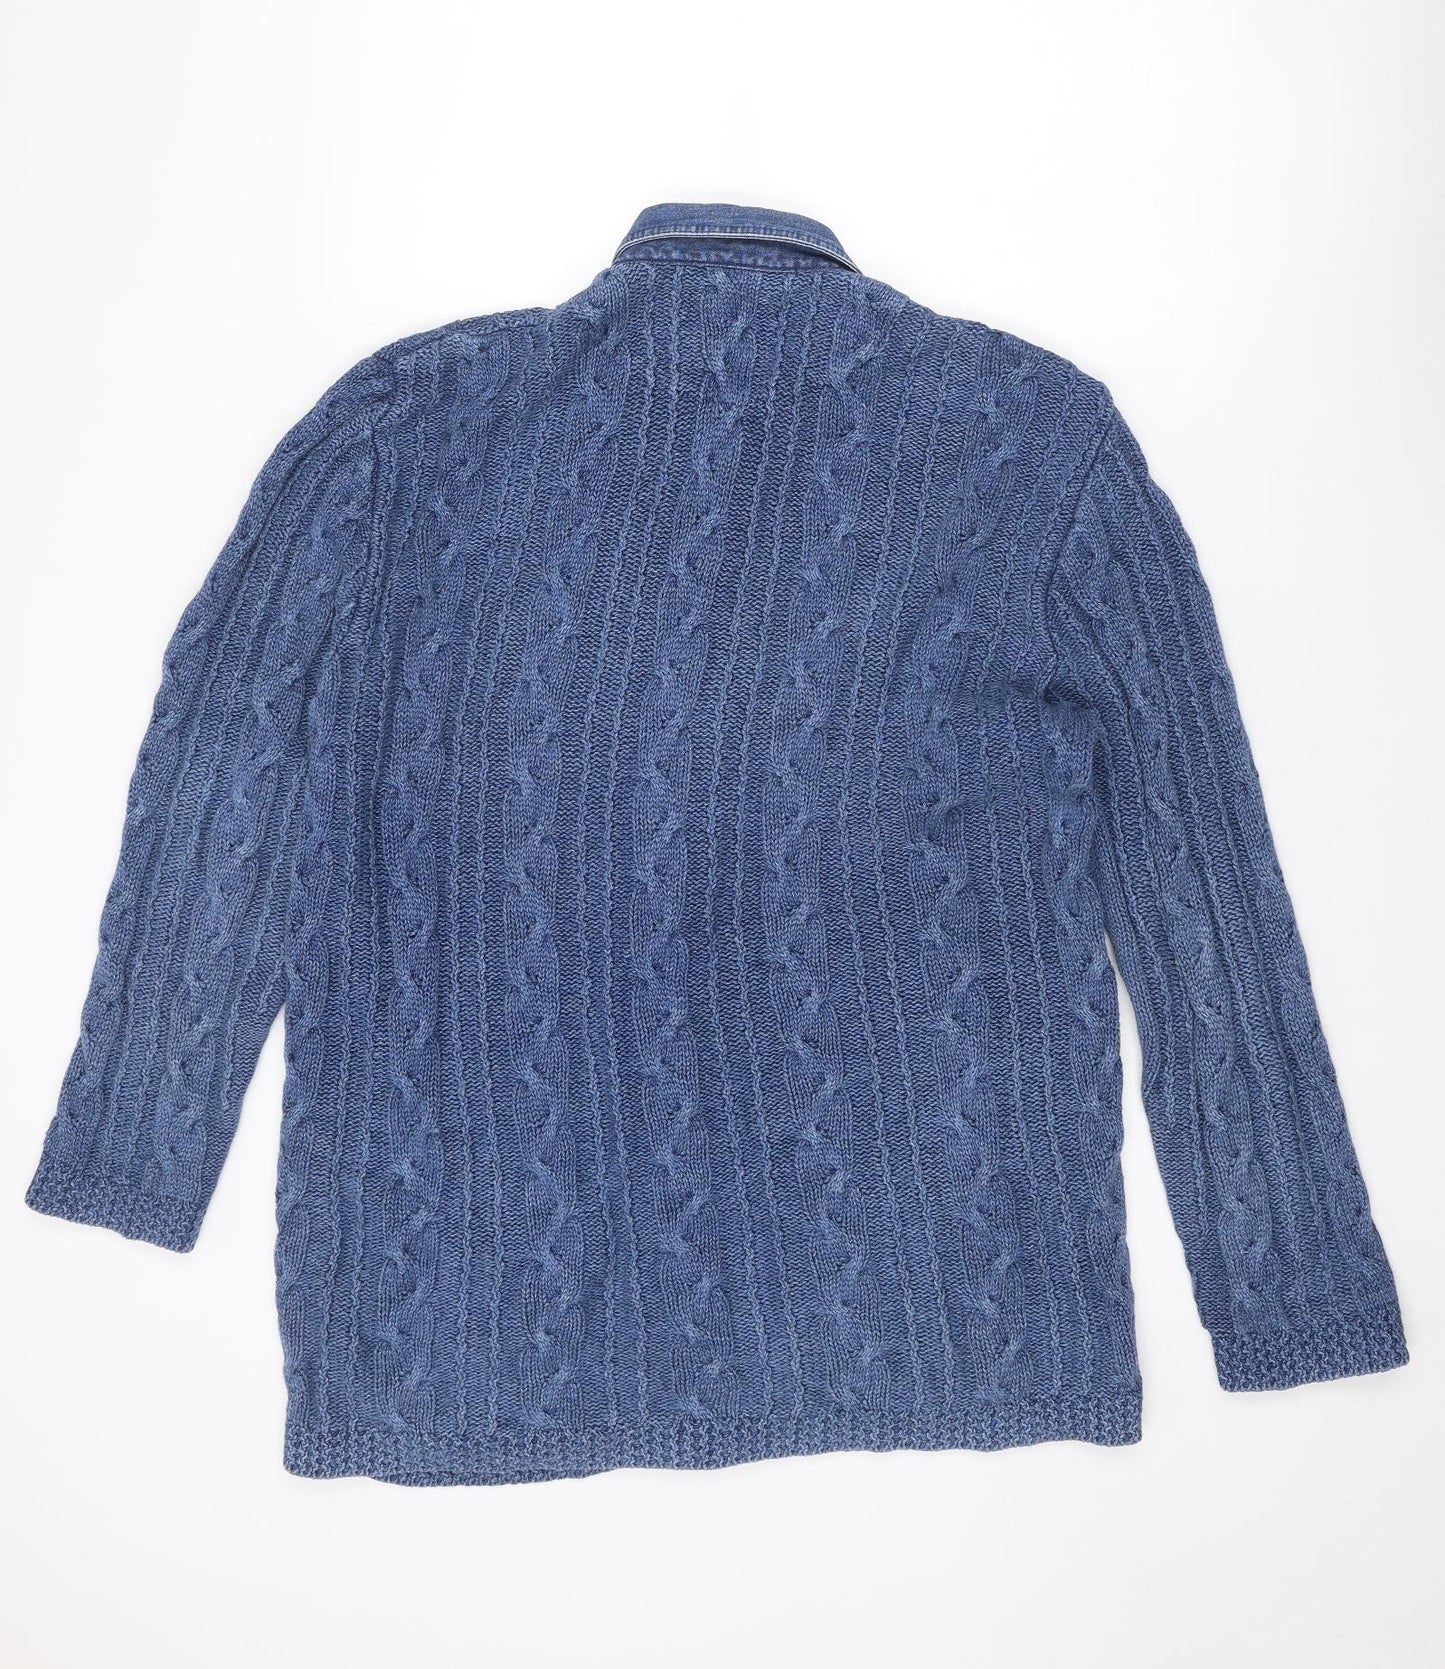 Blue Willi's Mens Blue Collared Acrylic Cardigan Jumper Size L Long Sleeve